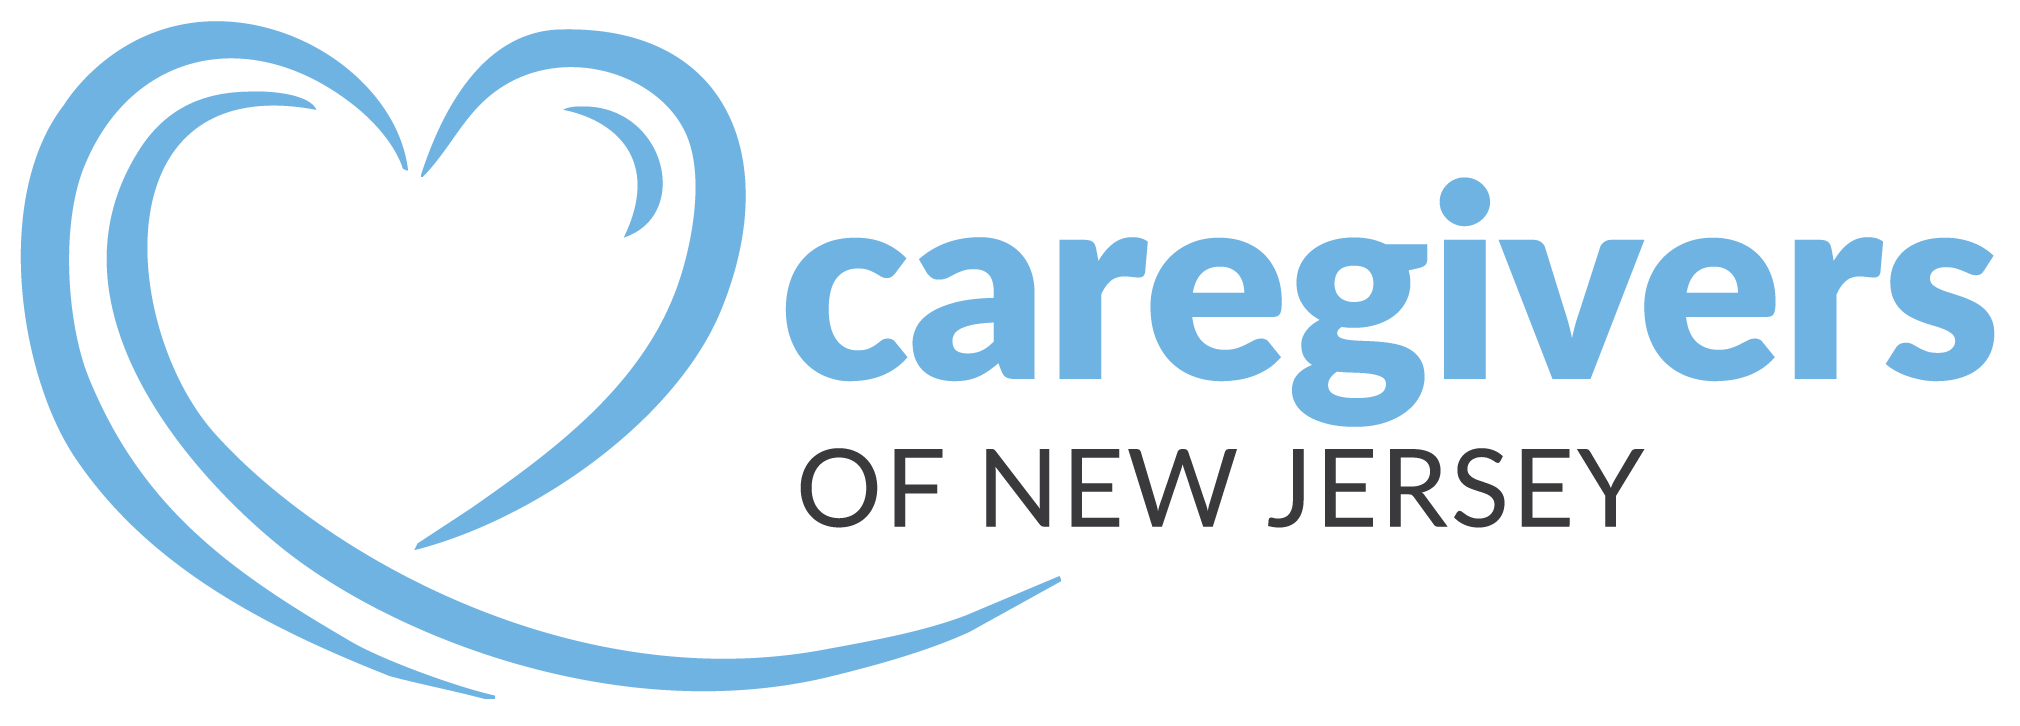 Caregivers of New Jersey